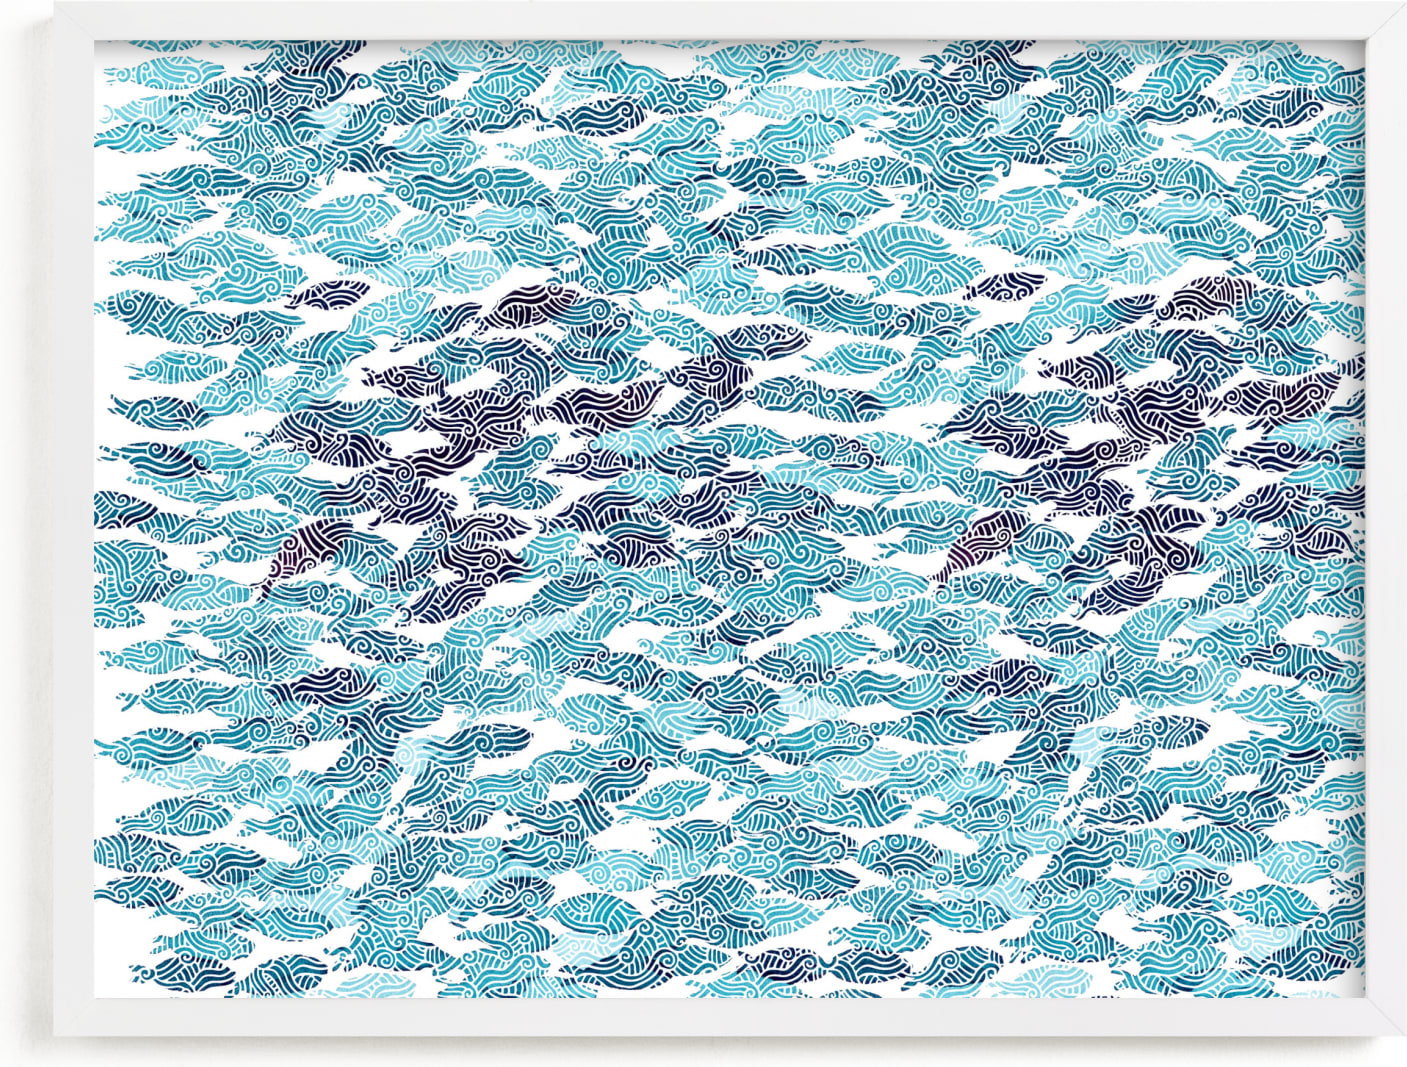 This is a blue kids wall art by Jason Grimes called Fish Swirl.